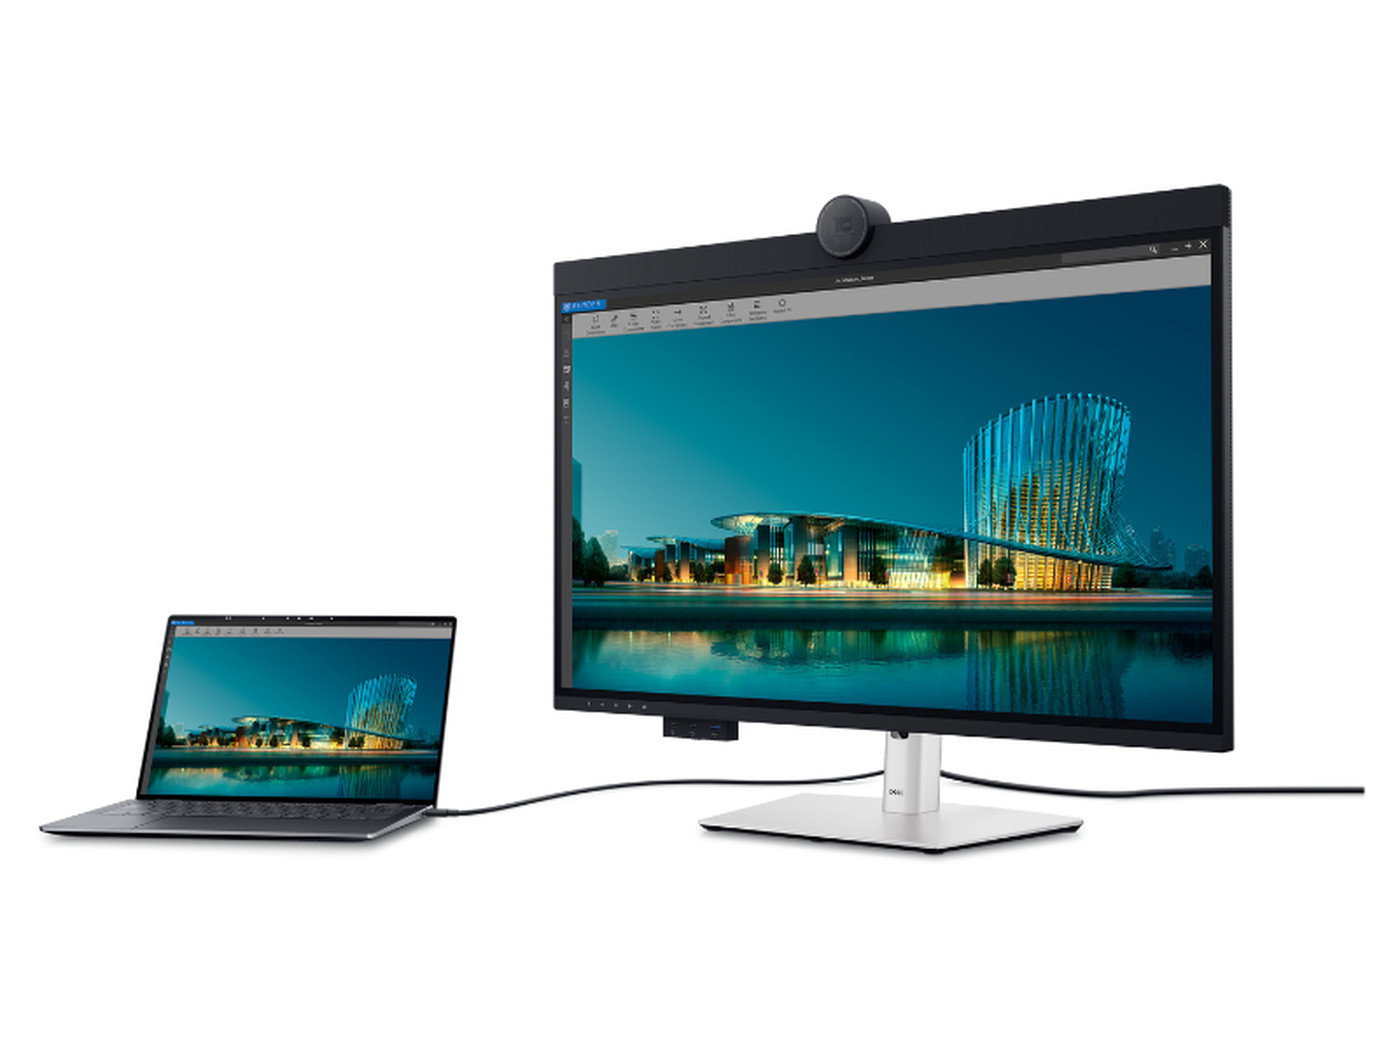 Dell's new 32-inch 6K monitor gives Apple's ProDisplay XDR some competition  - The Verge